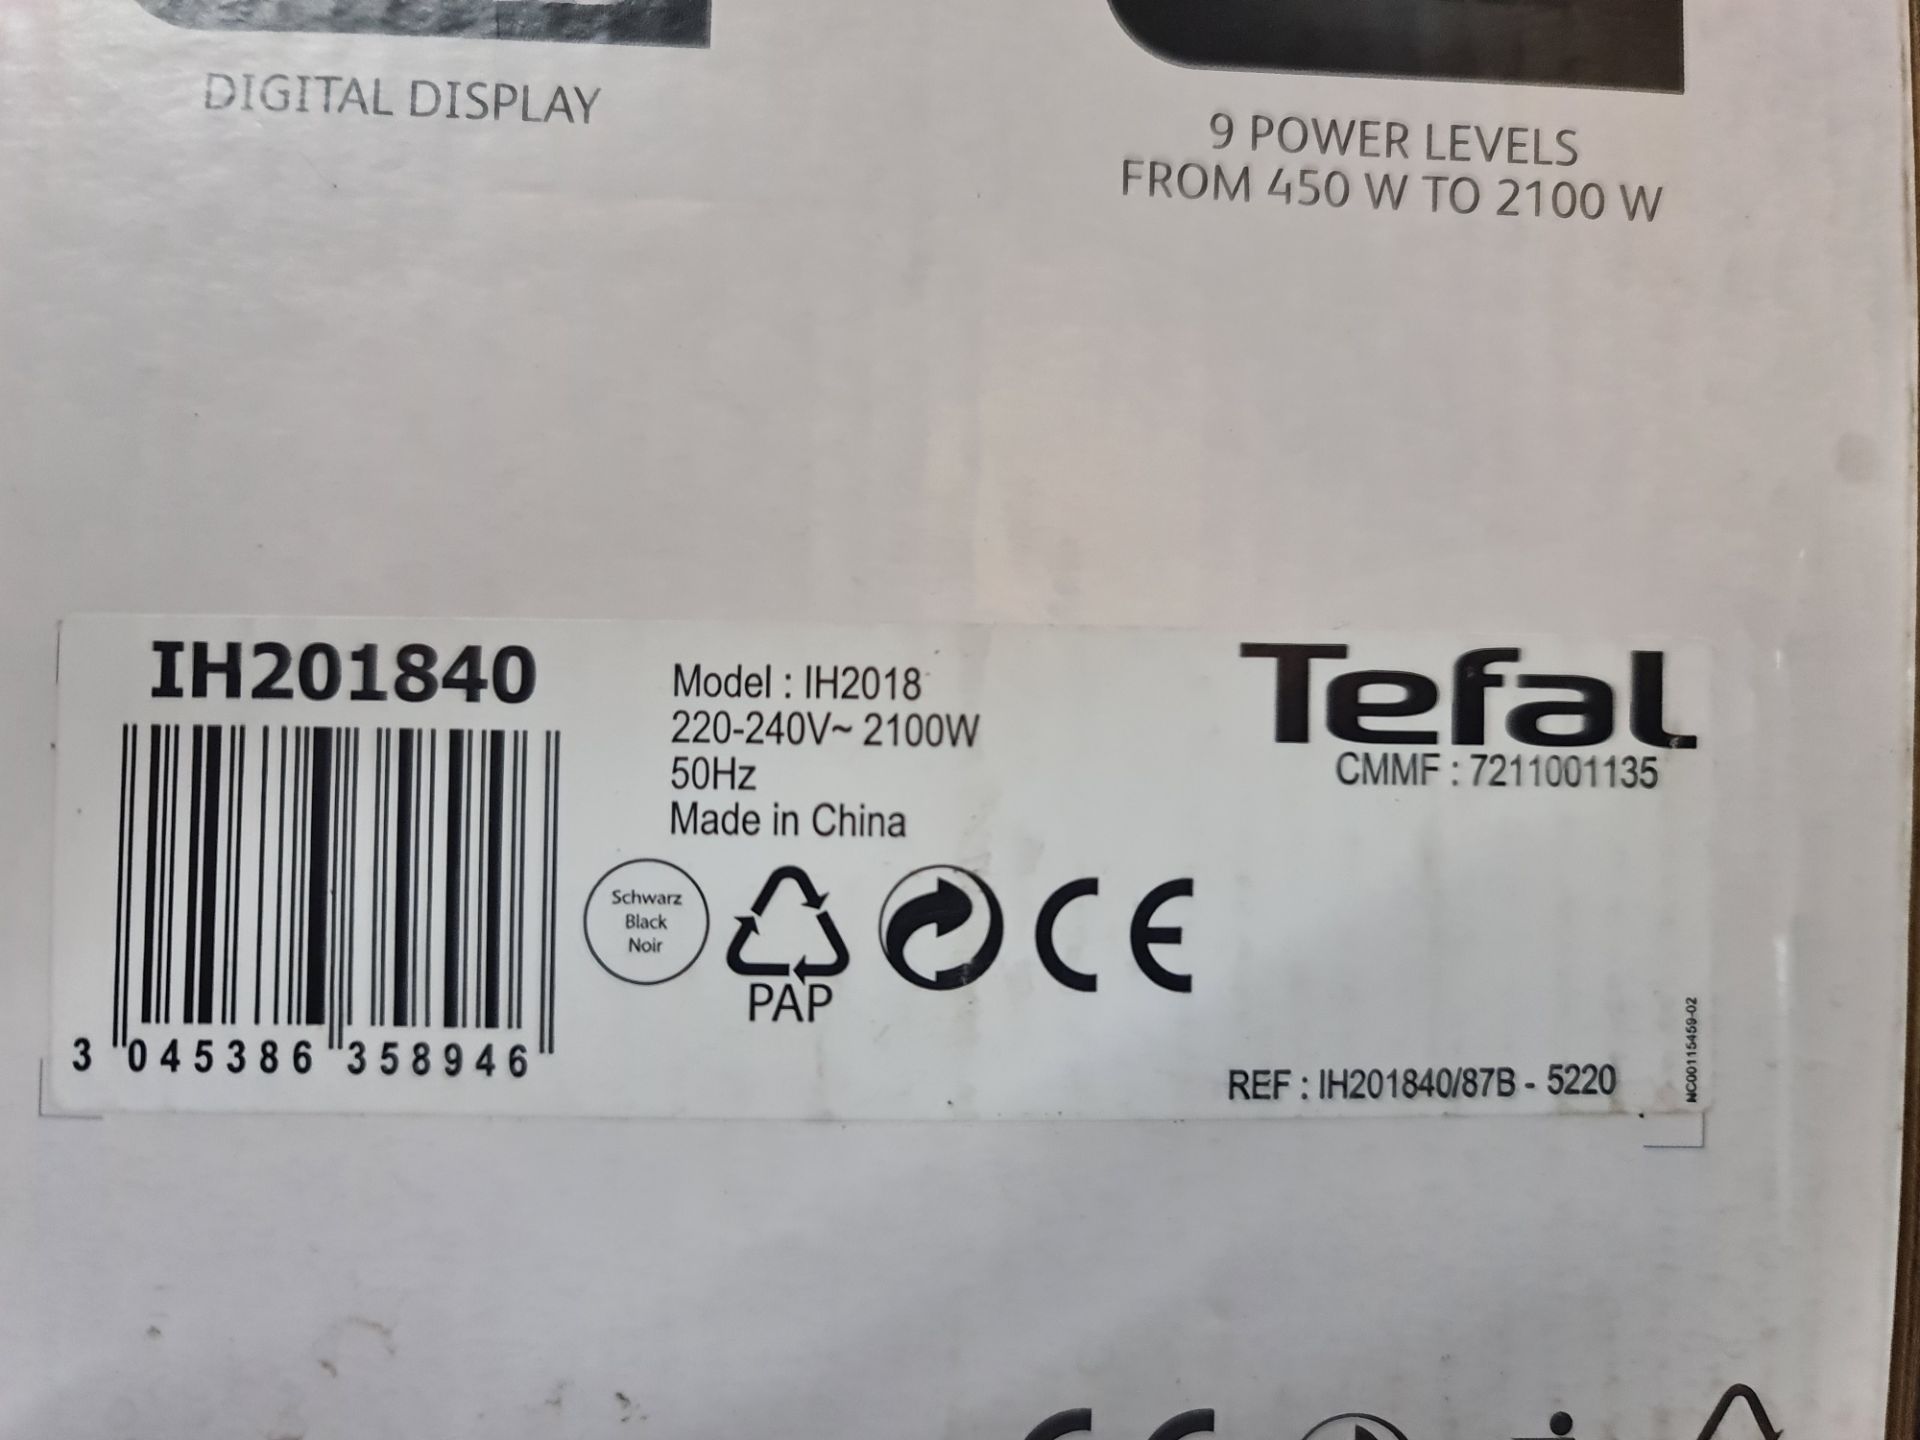 Tefal benchtop ceramic hob Every Day 1H including box - Image 5 of 5